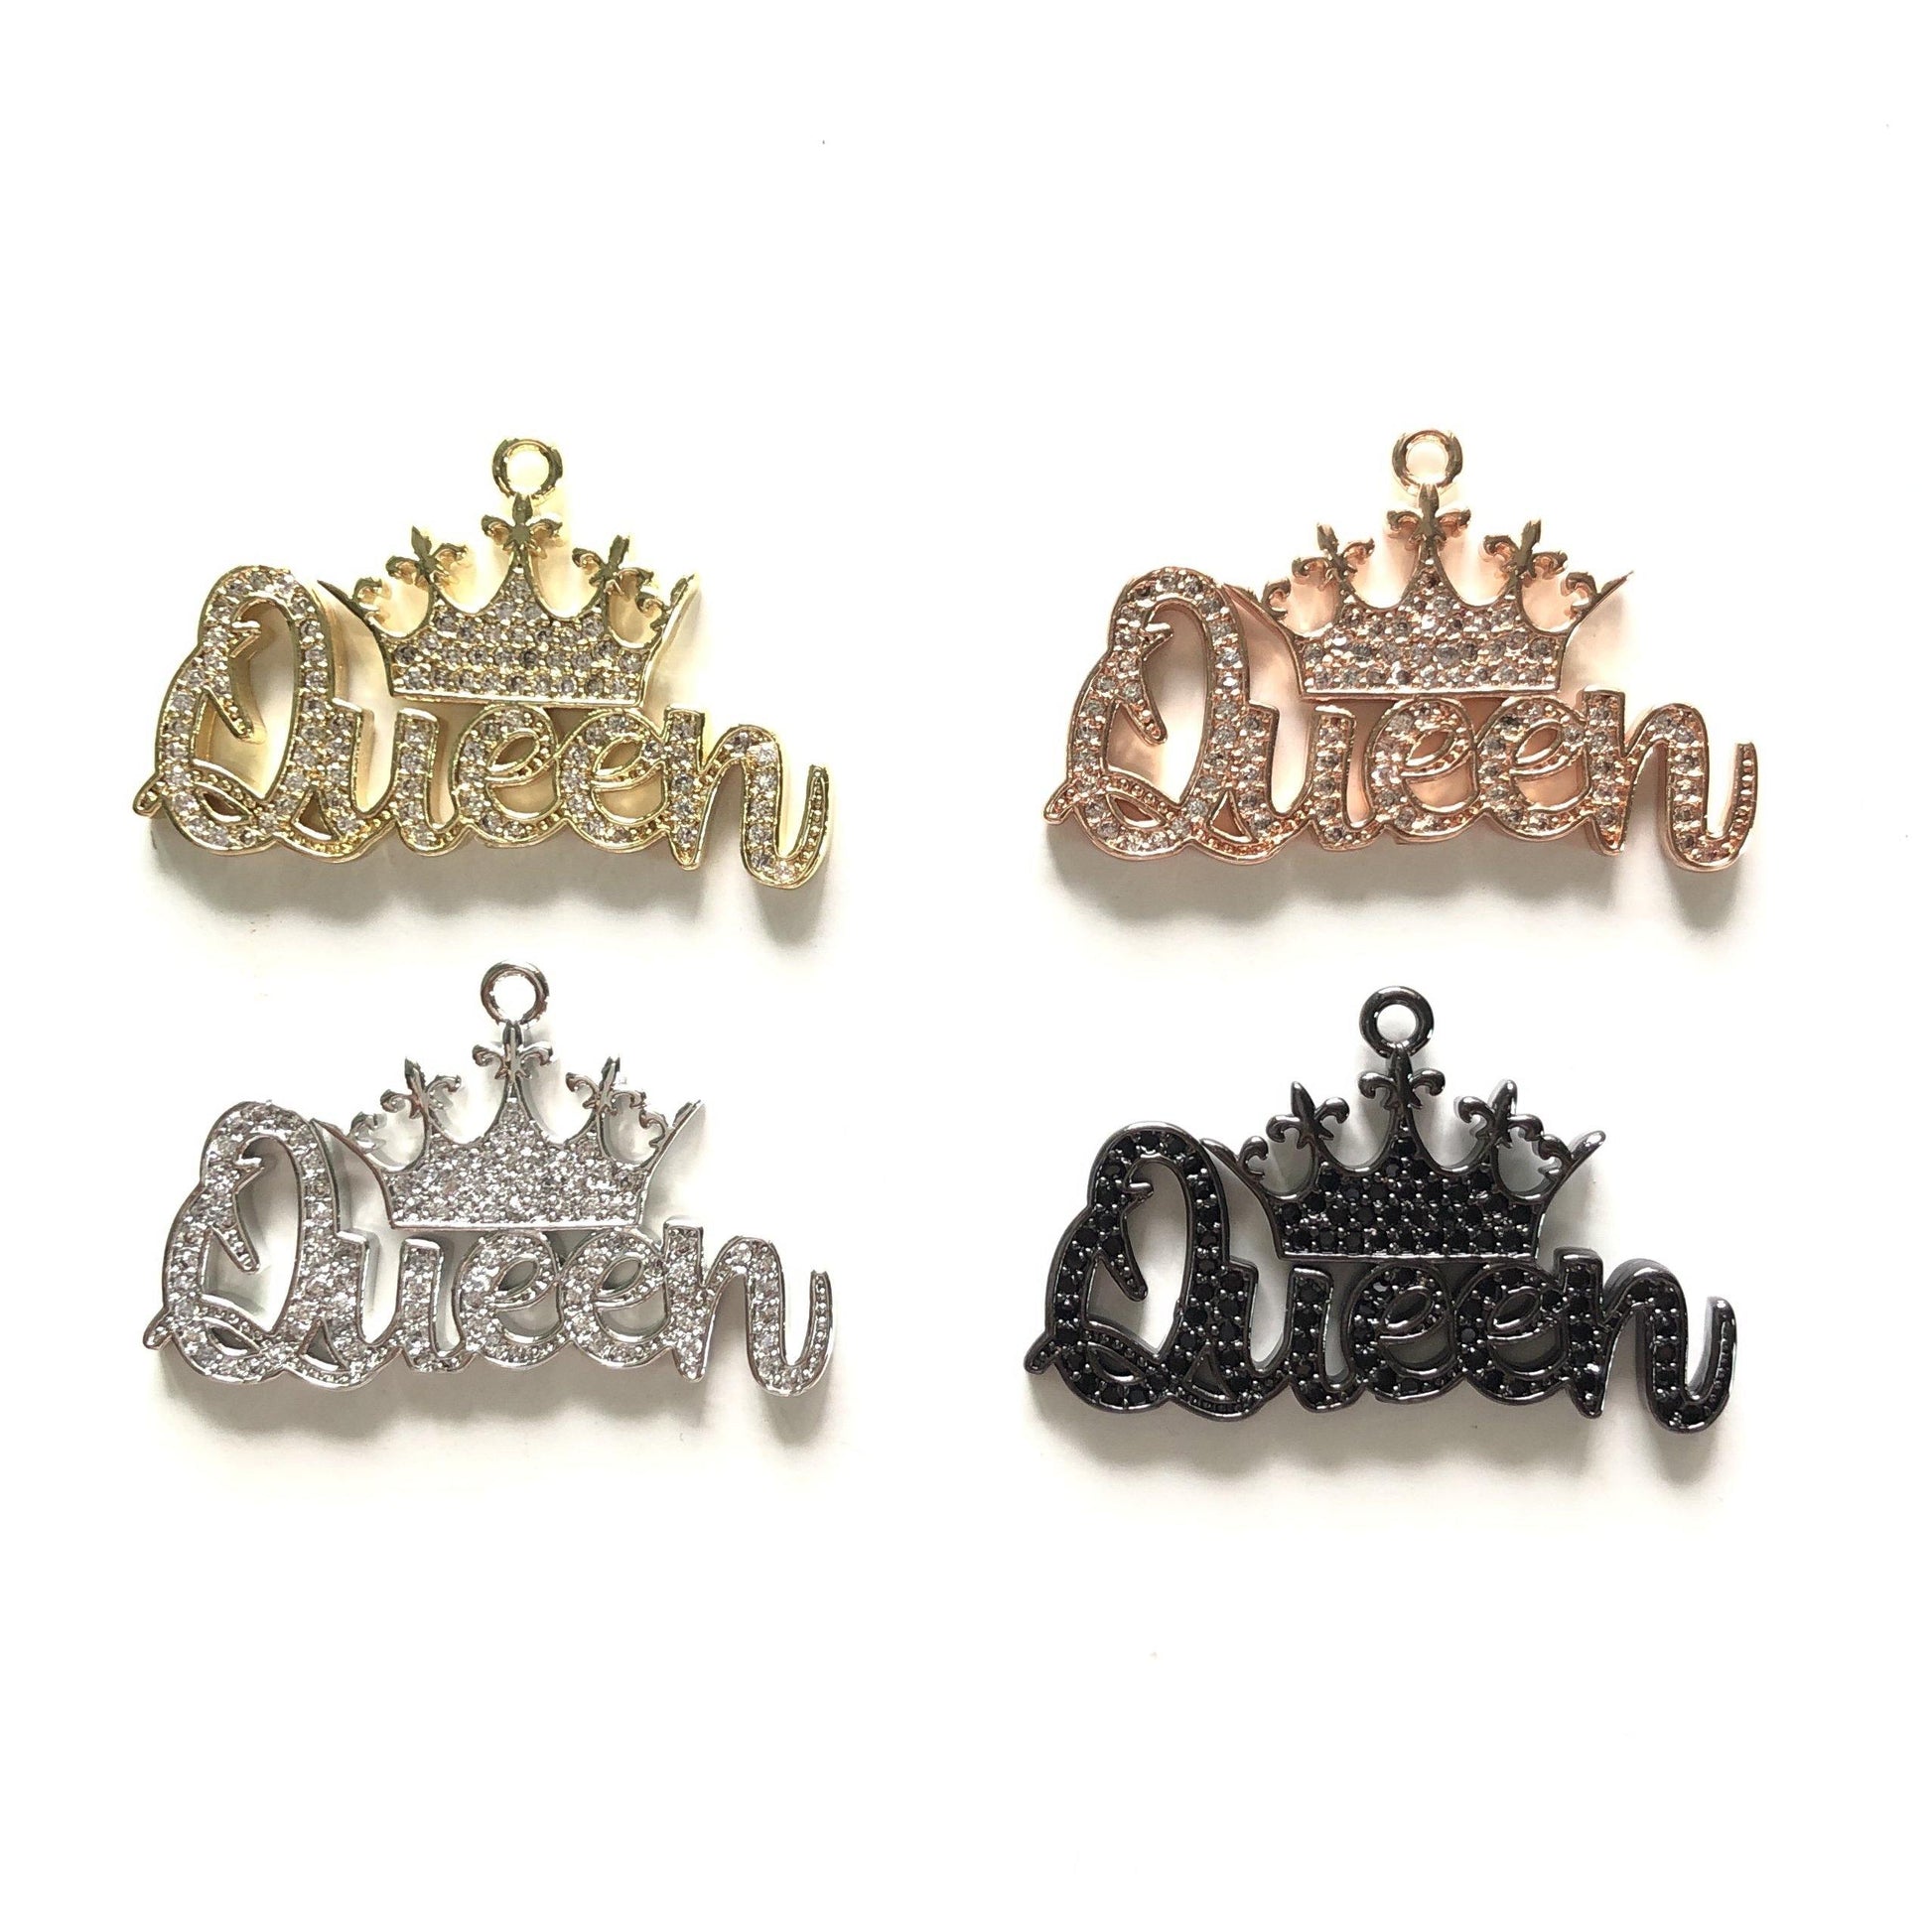 QUEEN Charm, Word Charm, Silver Gold Black Rose Gold, Charms for Bracelets,  Charms for Jewelry Making,Pendant